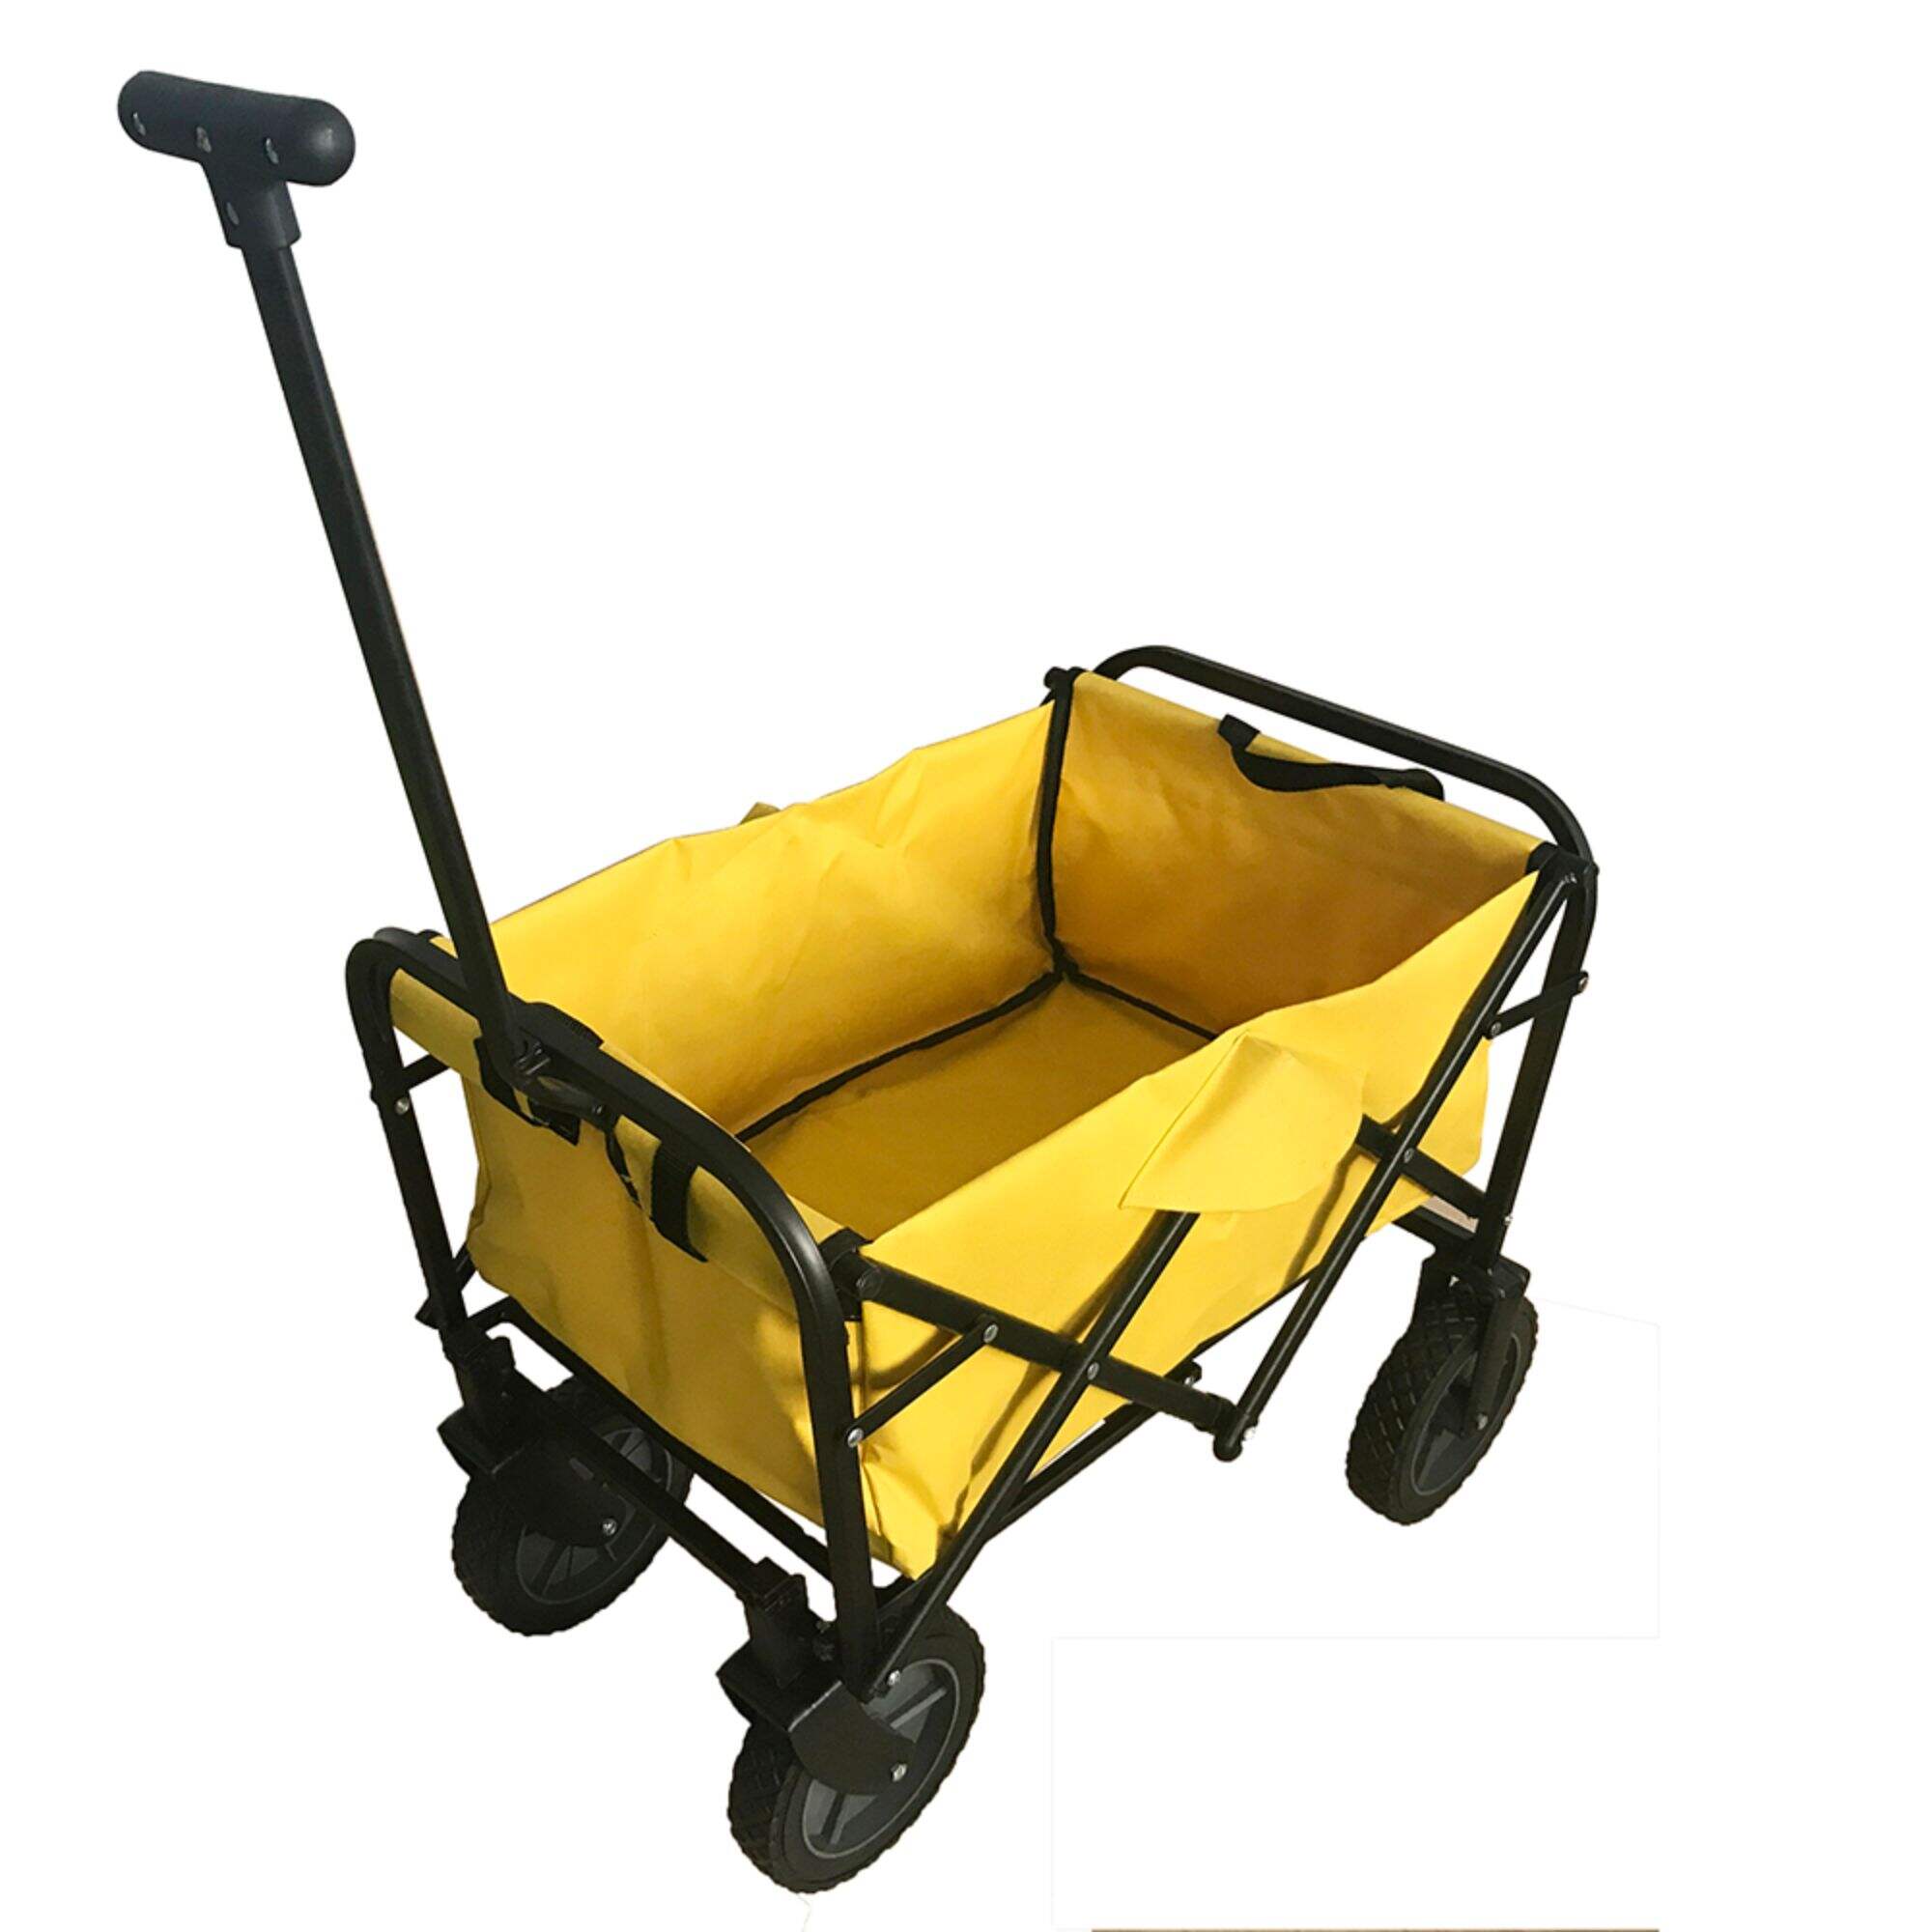 GT1800 Folding Wagon, Collapsible Camping Wagon Cart, for Outdoor Kids Push Pull